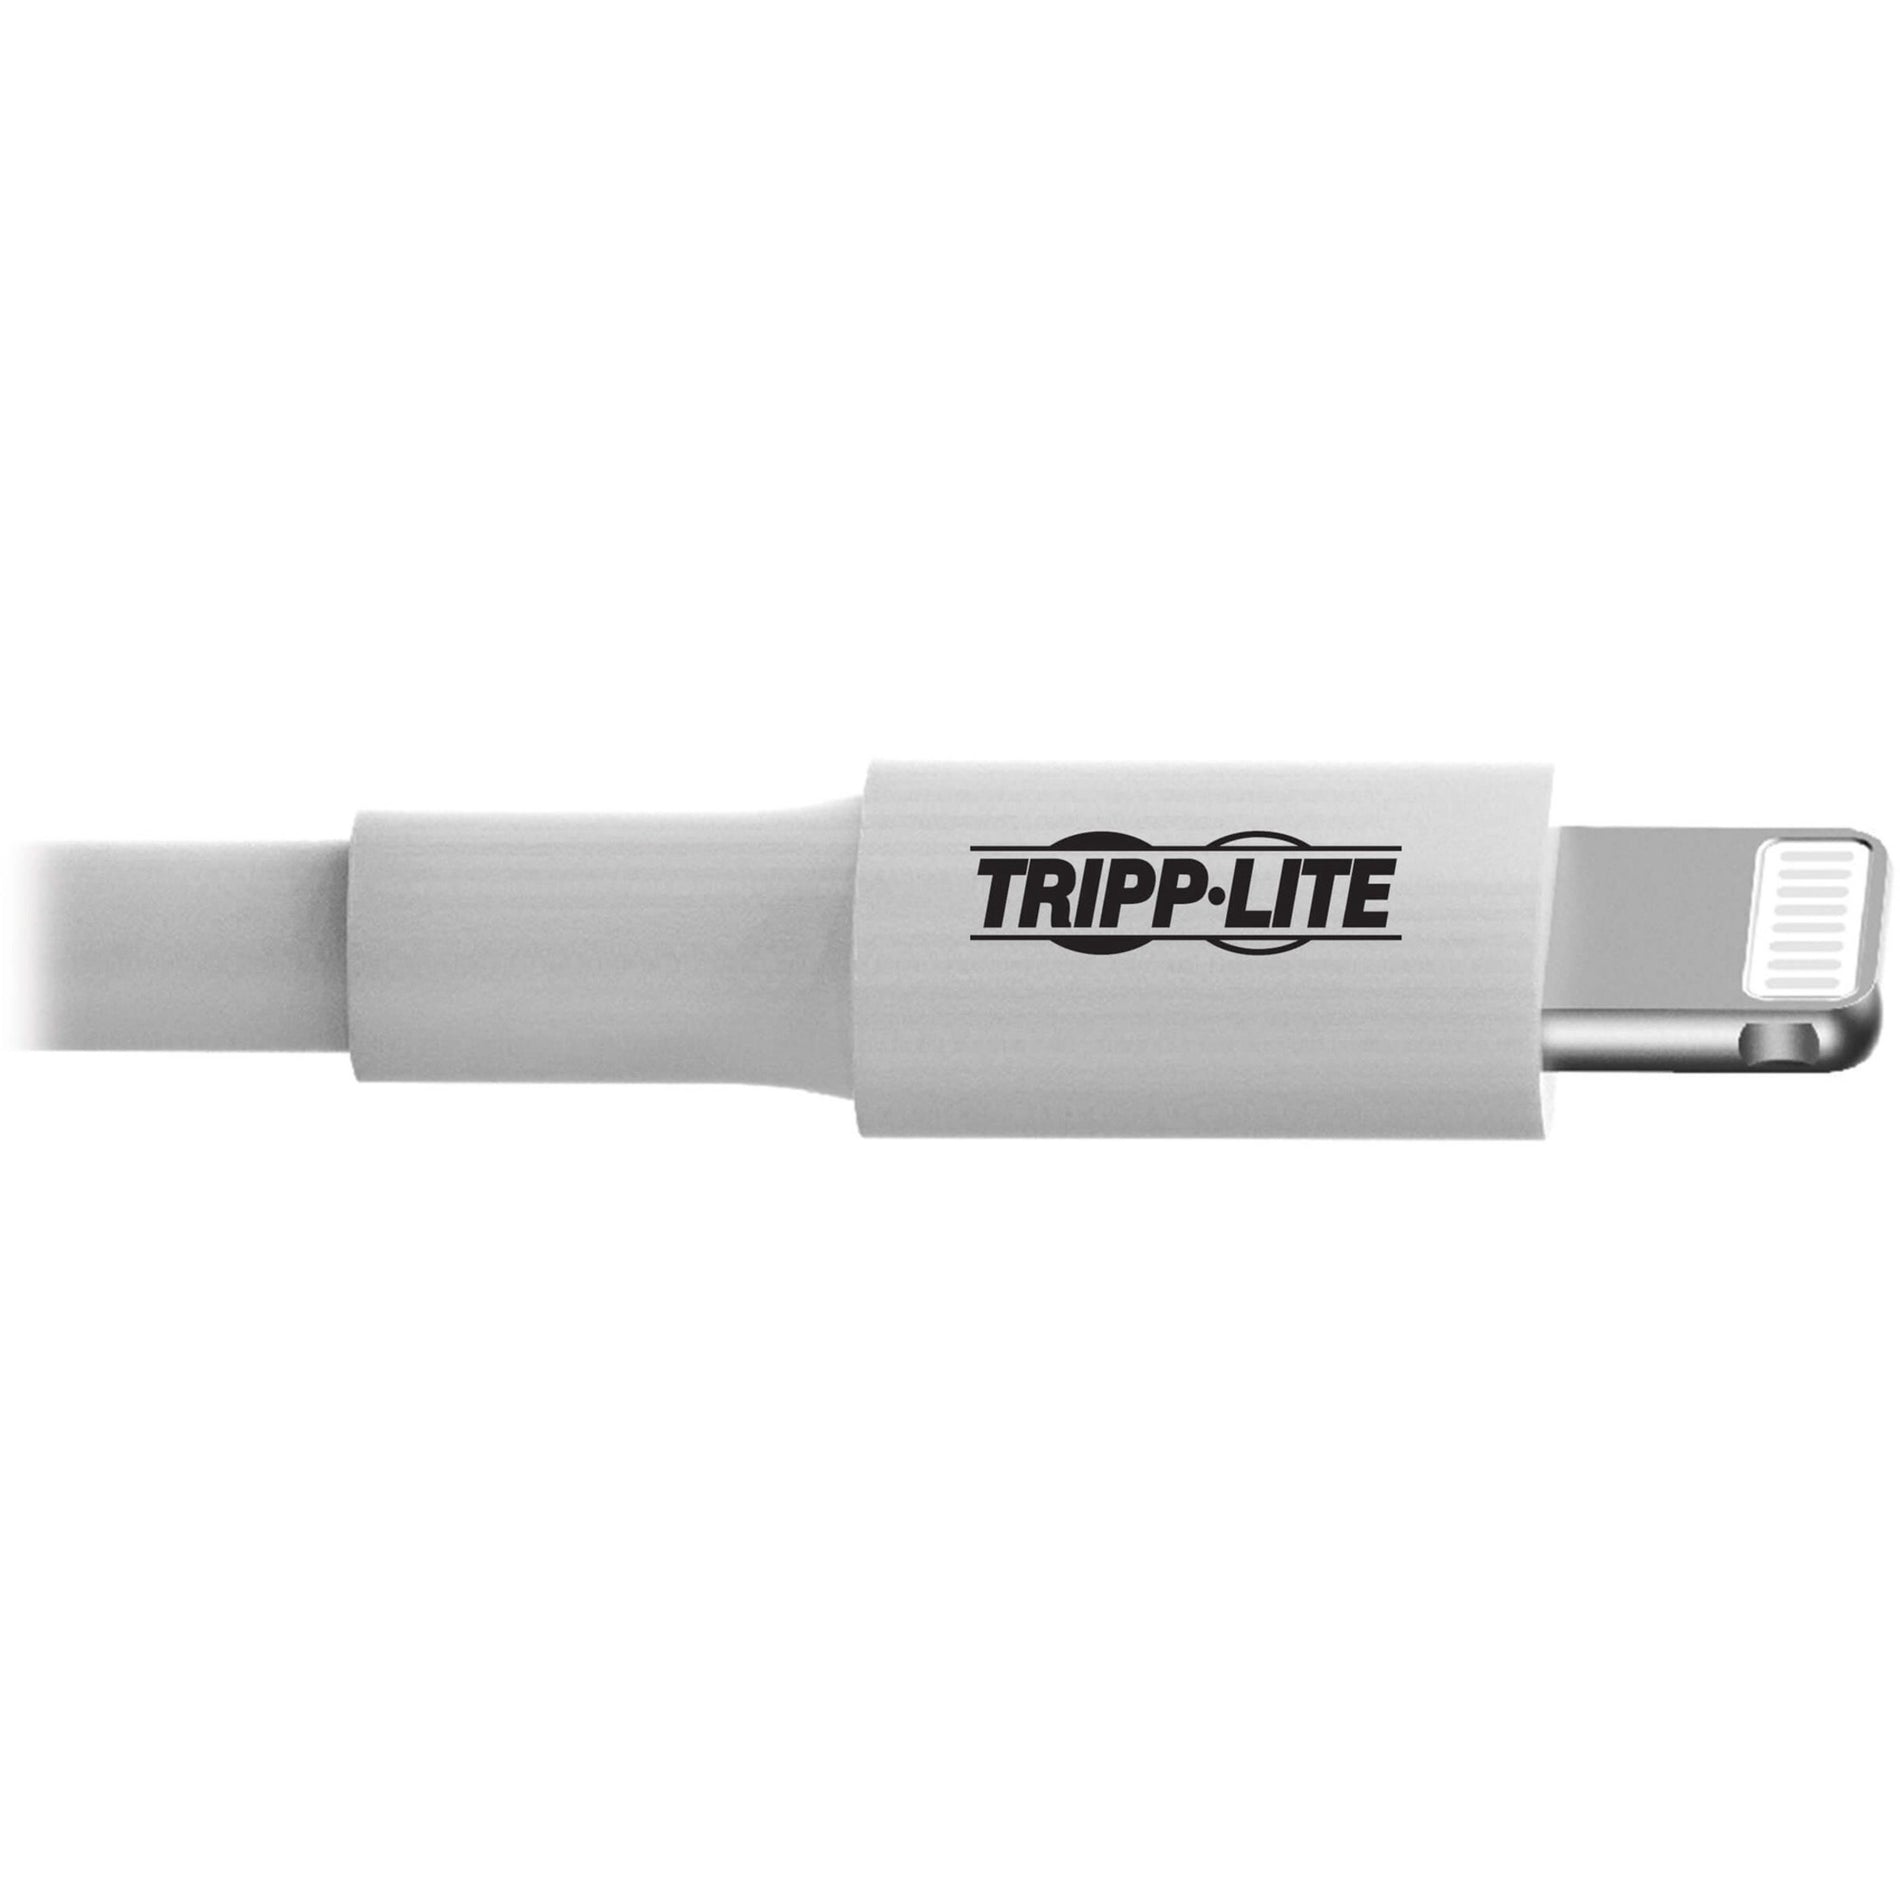 Tripp Lite M100-006-WH 6ft (1.8M) White USB Sync / Charge Cable with Lightning Connector, Compatible with iPhone, iPad, iPod